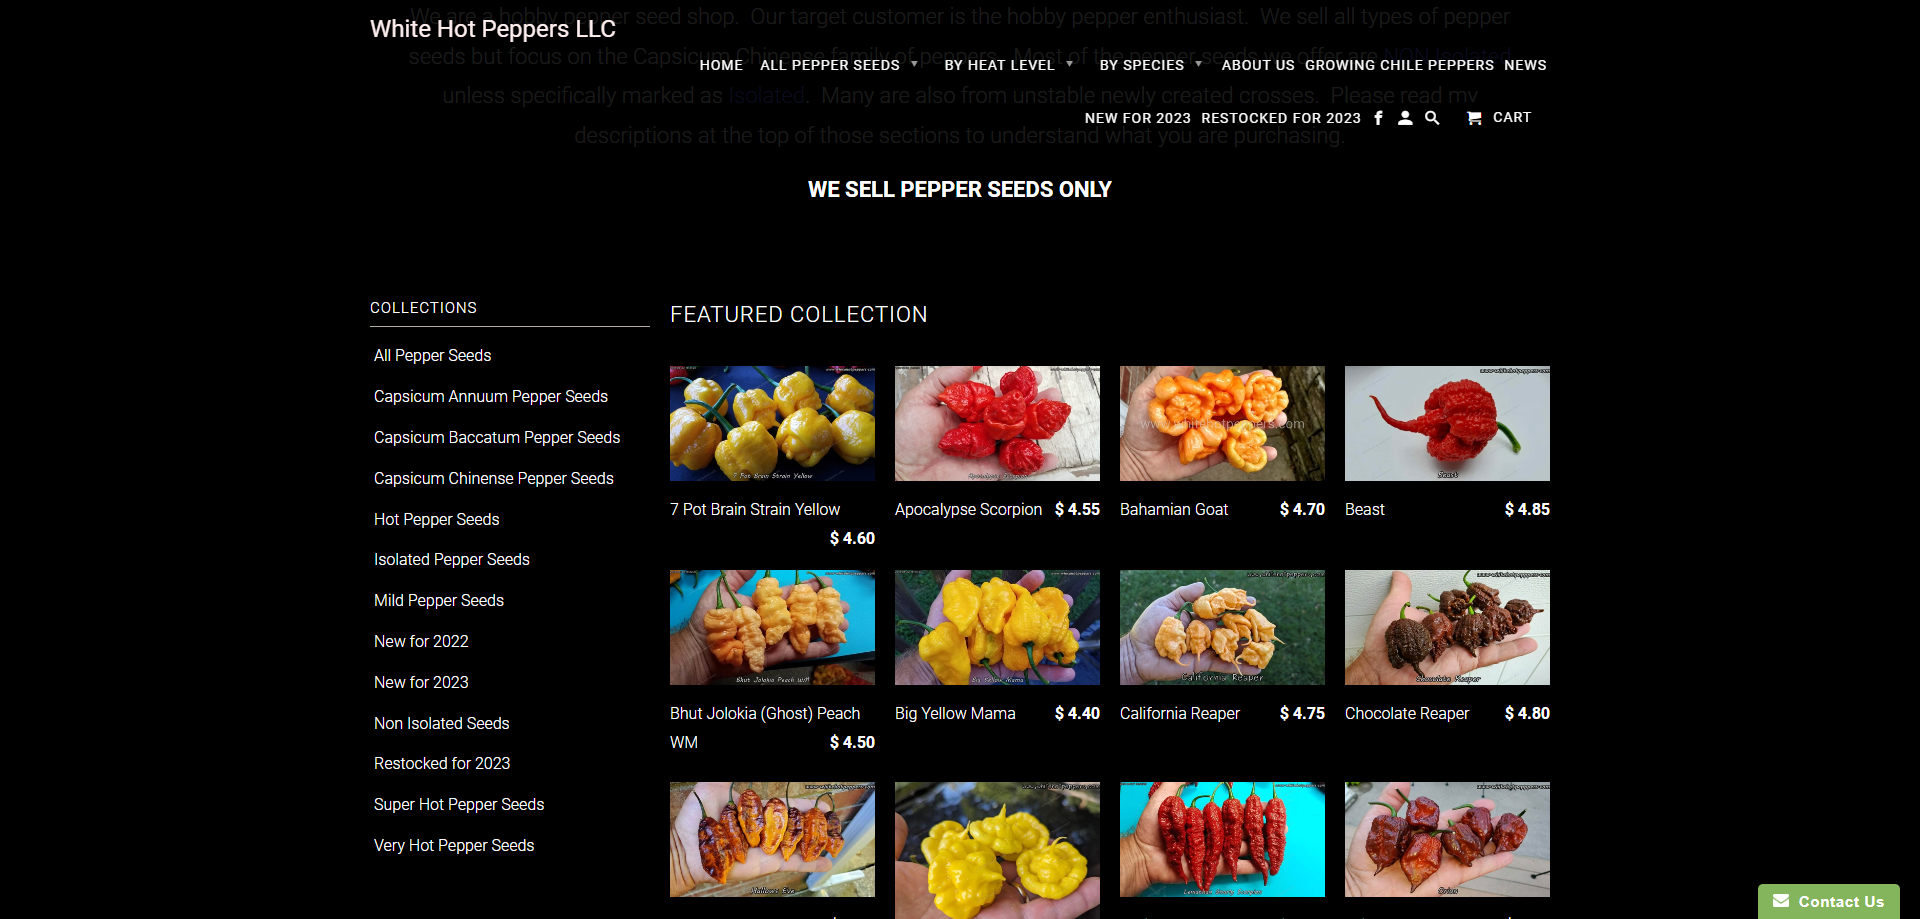 FireShot Capture 341 - WHITE HOT PEPPERS LLC - www.whitehotpeppers.com.png